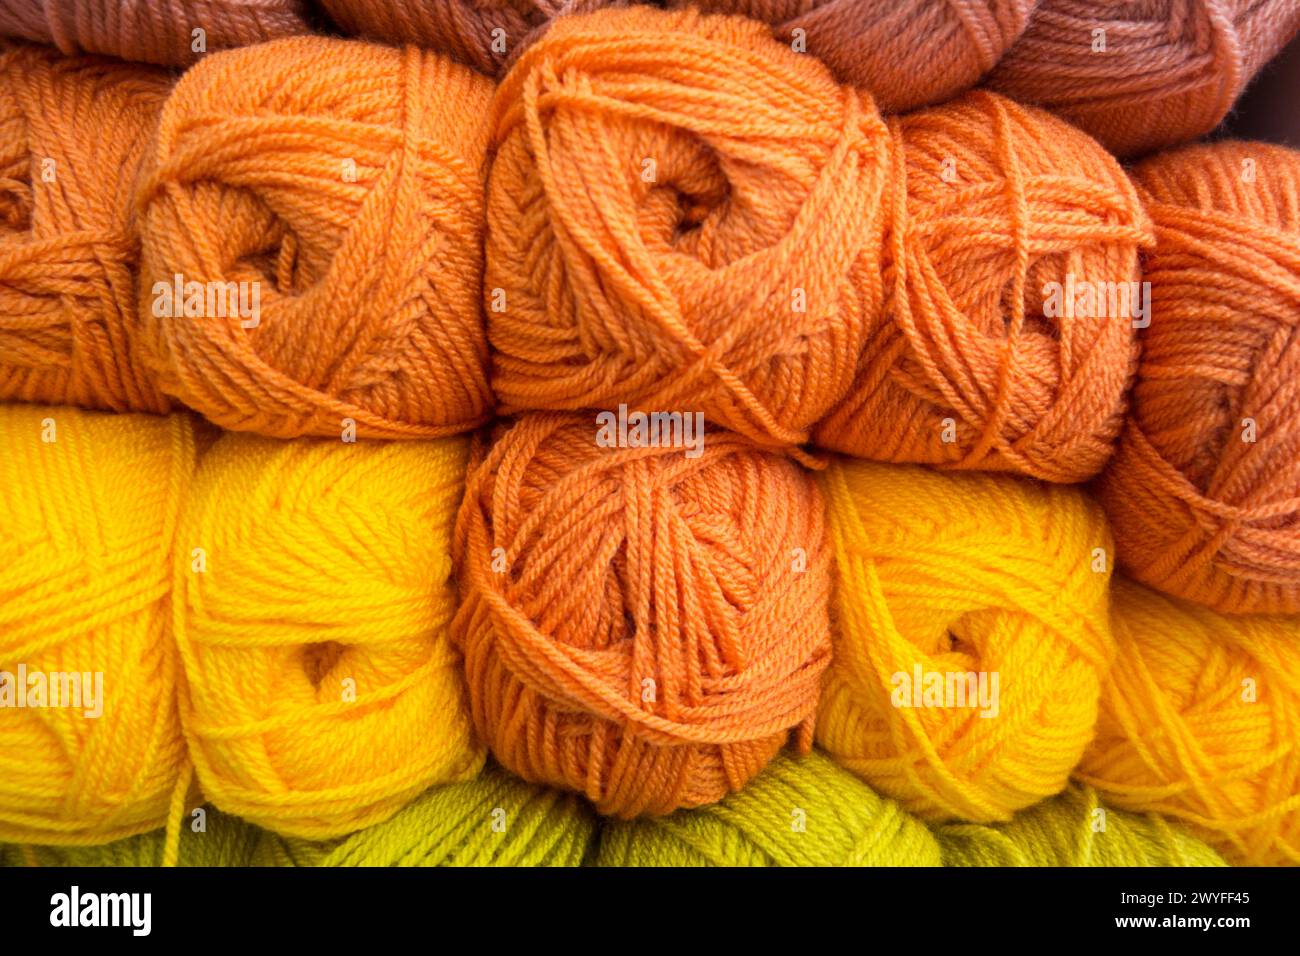 Close-up of yellow and orange colourful balls of wool Stock Photo